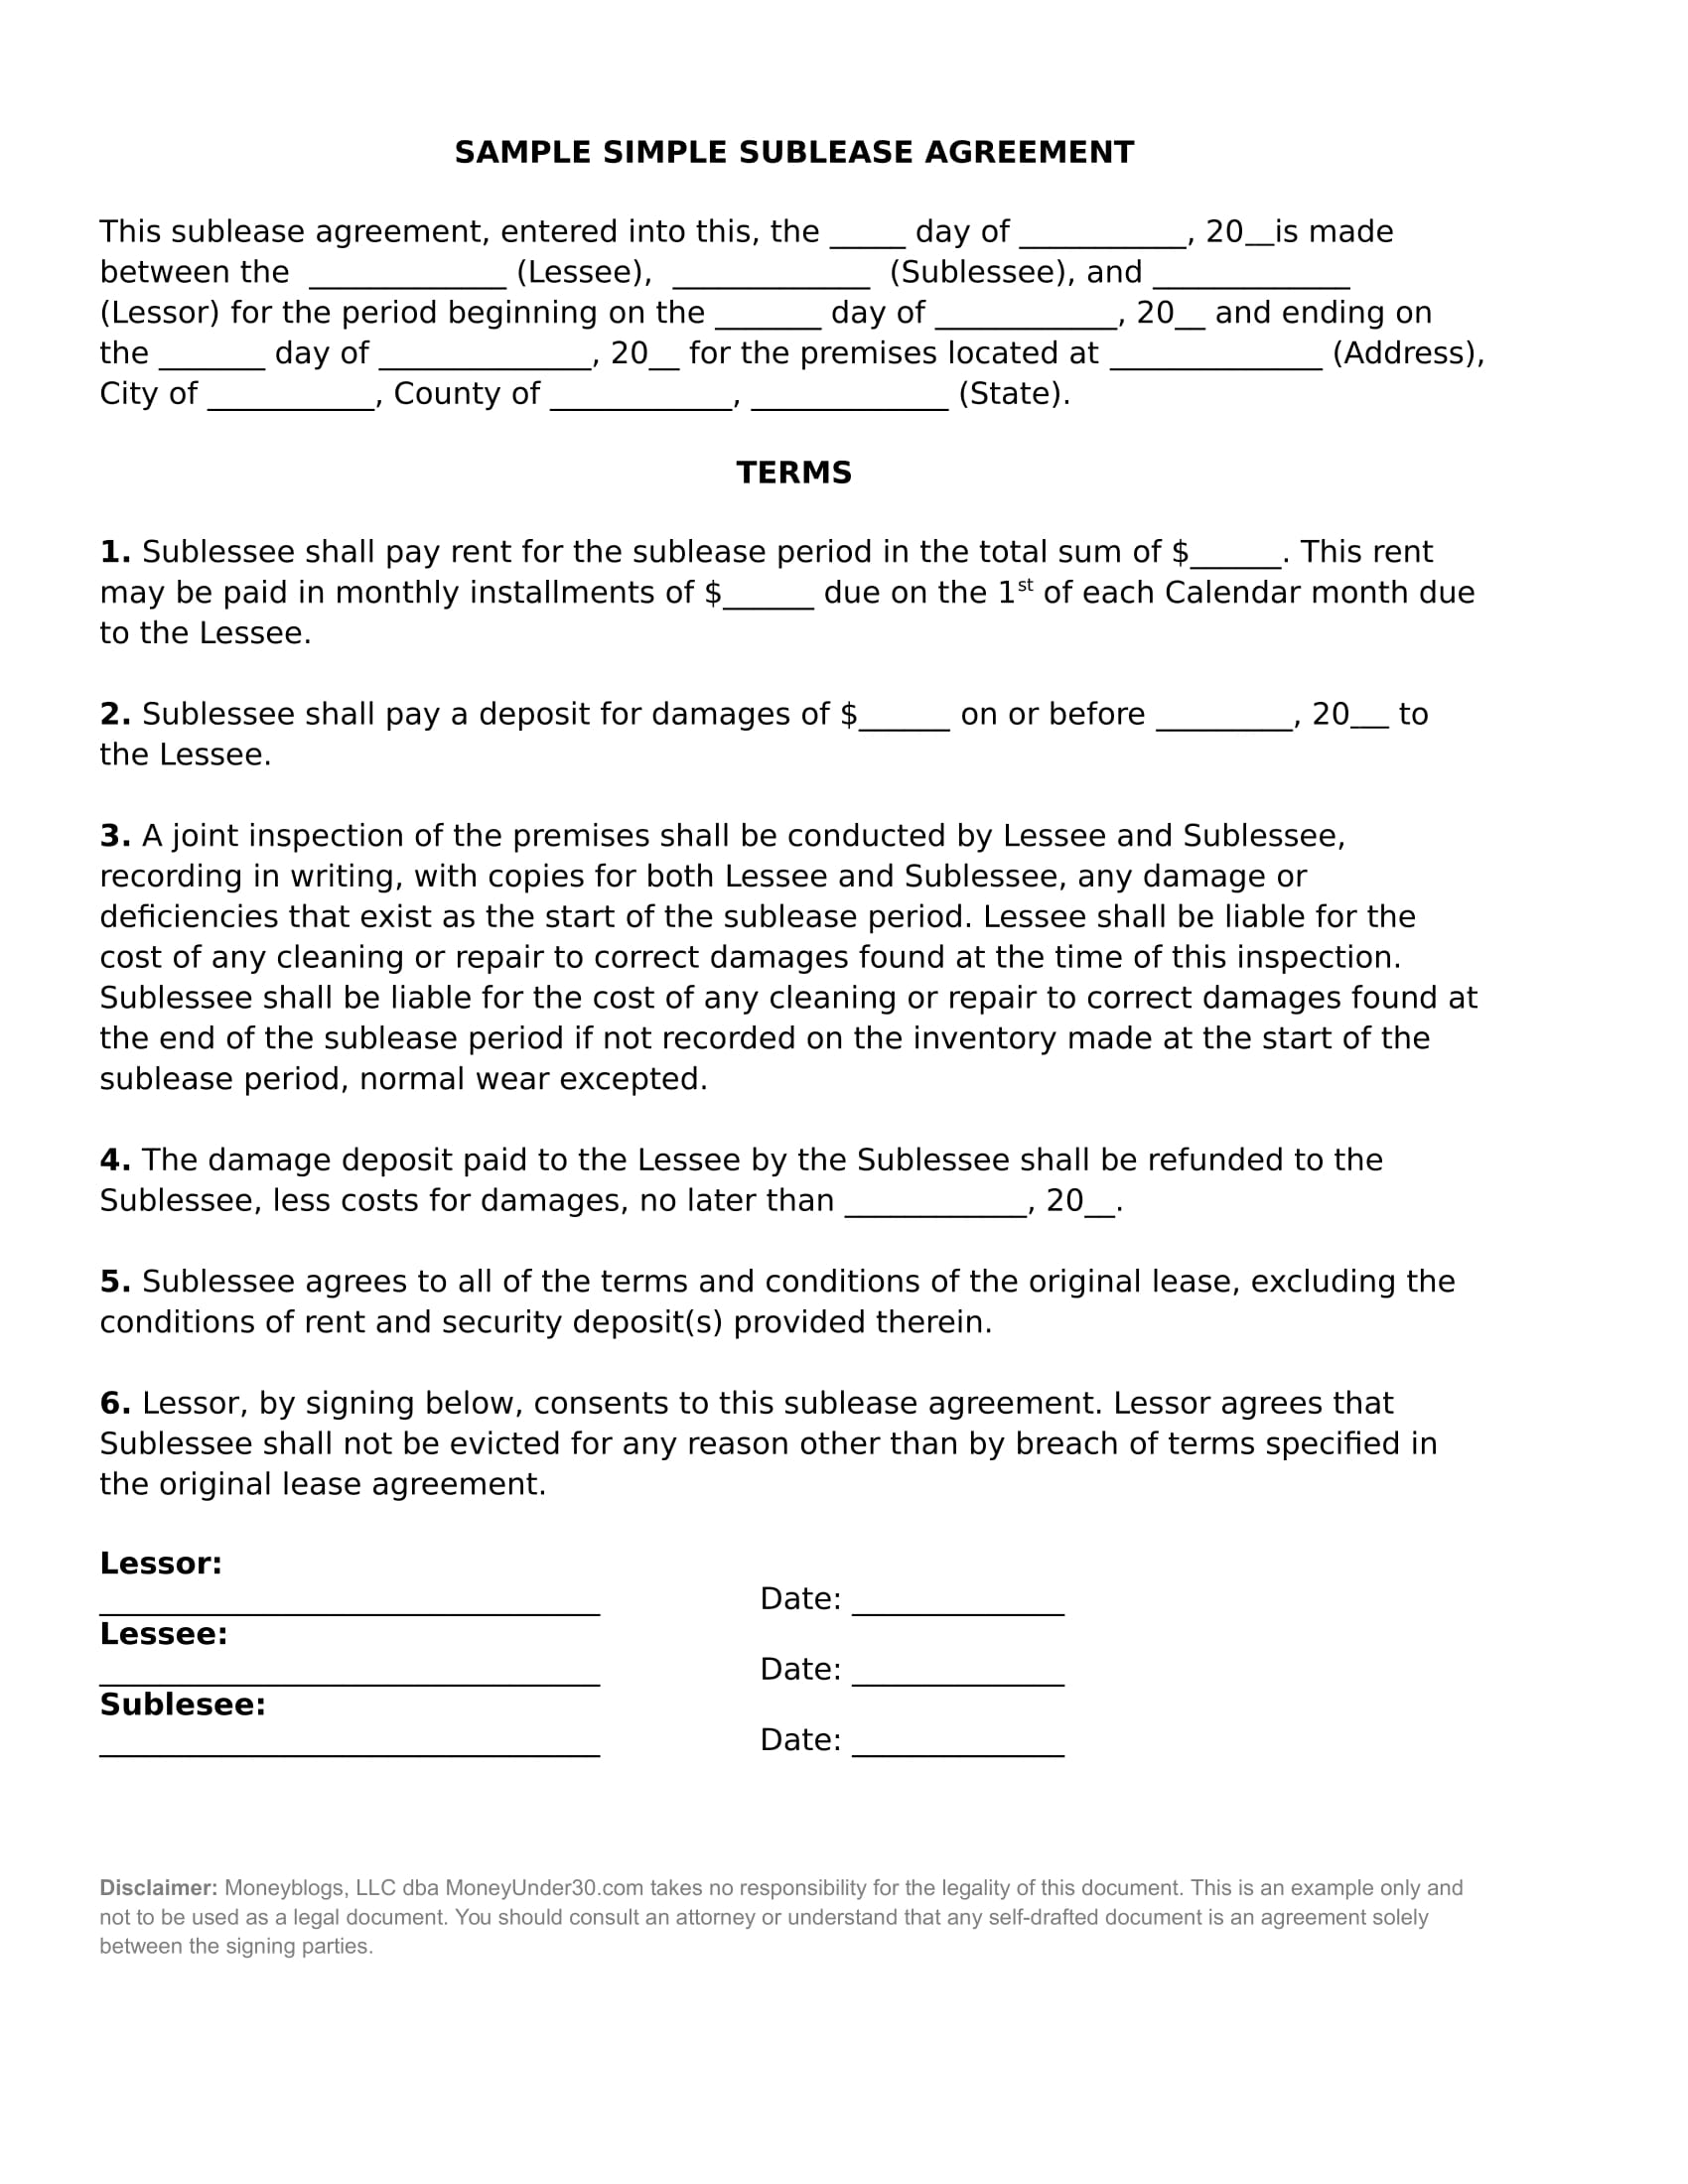 simple sublease agreement example